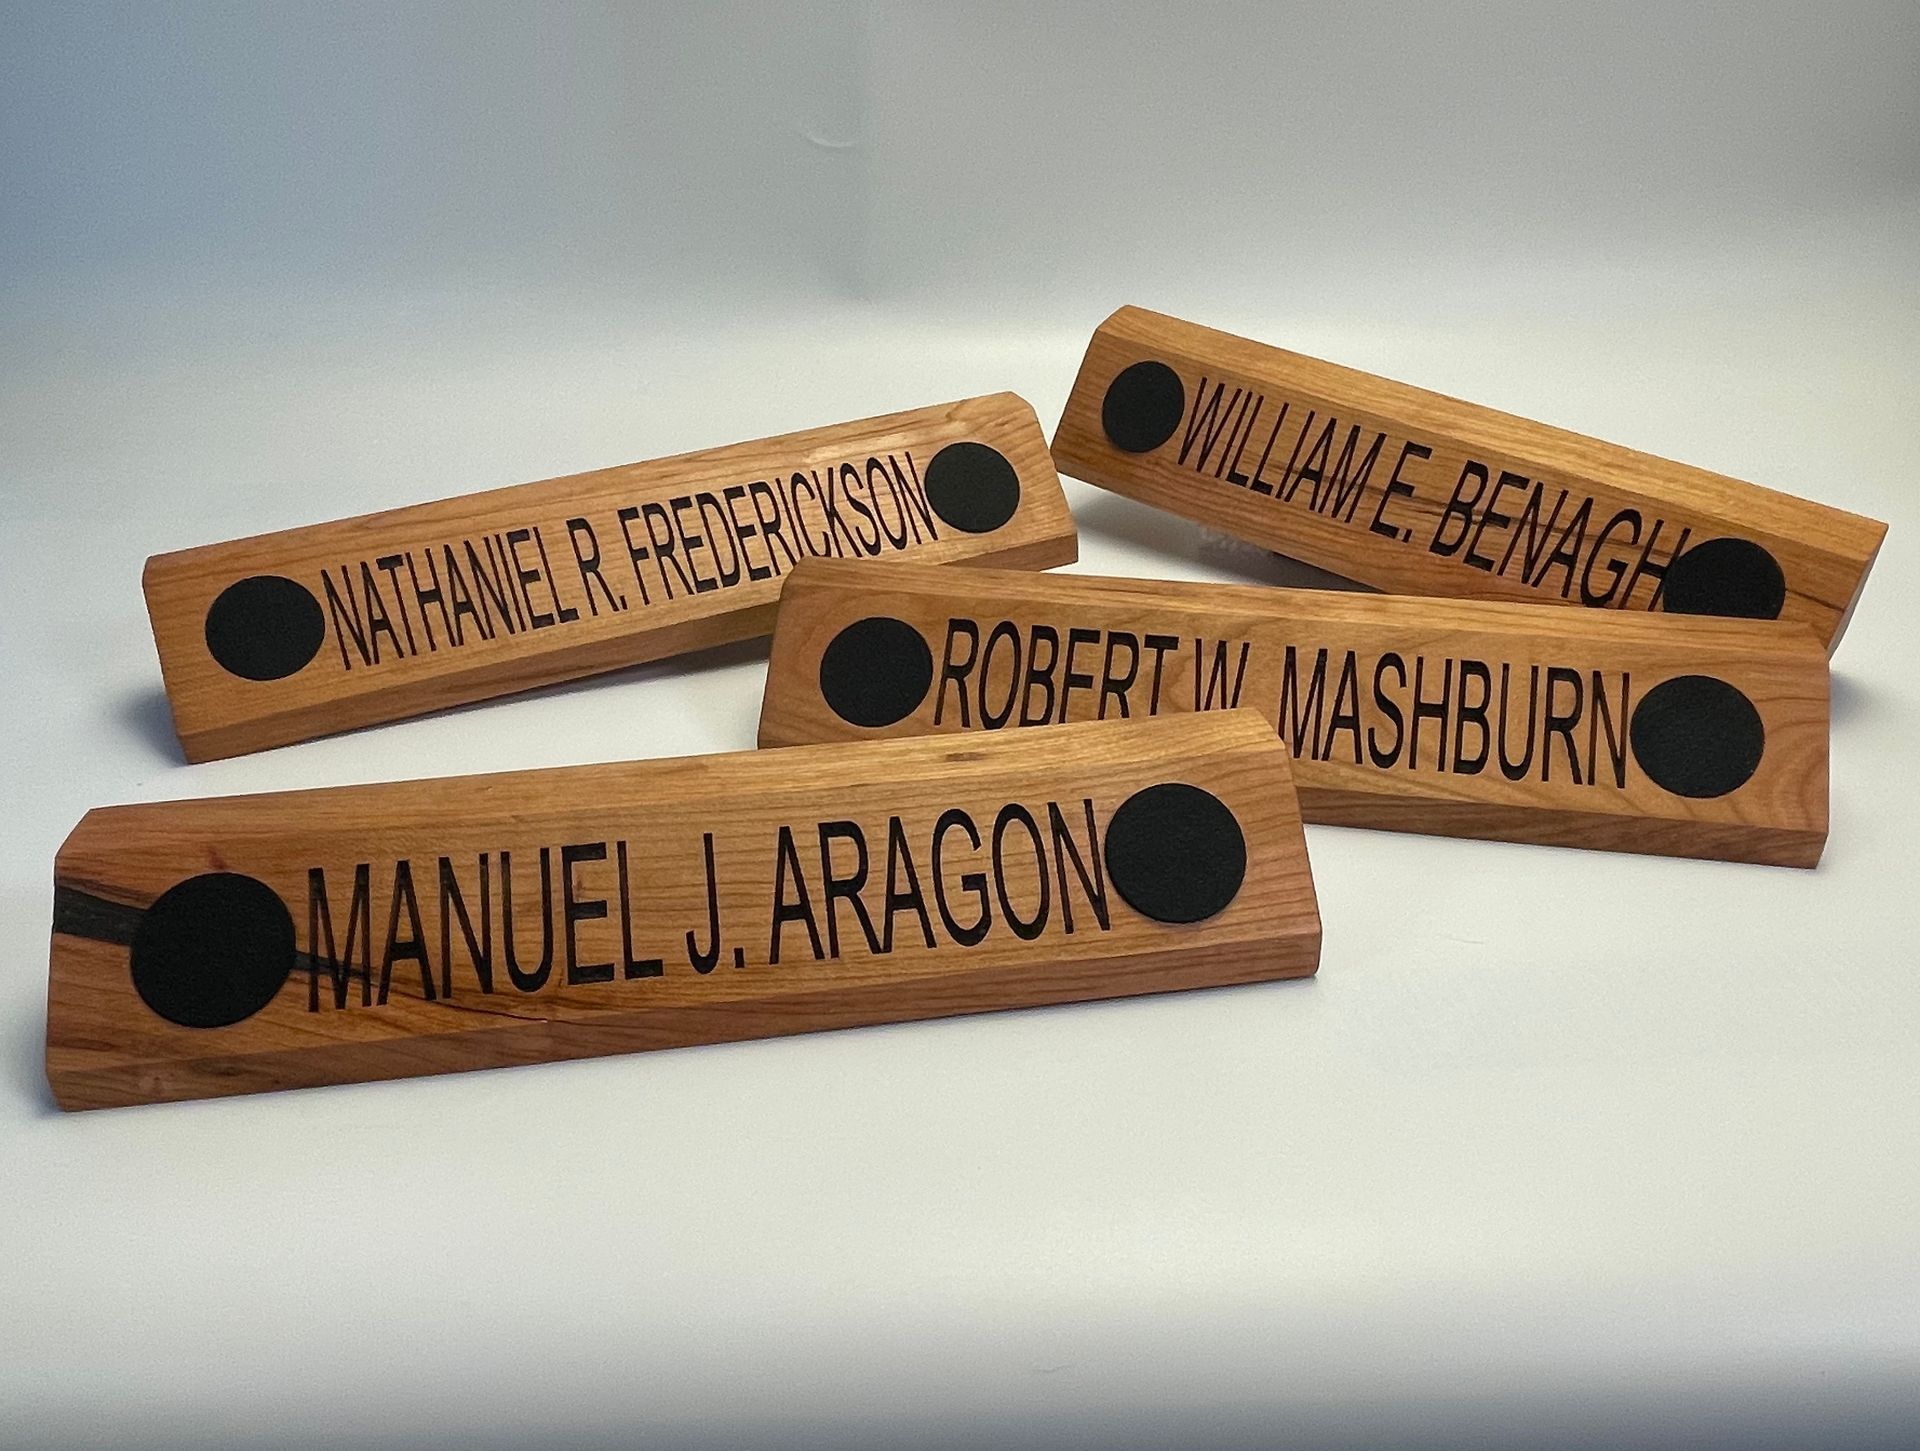 Four wooden name plates with the names manuel j. aragon robertin mashburn and williame benage